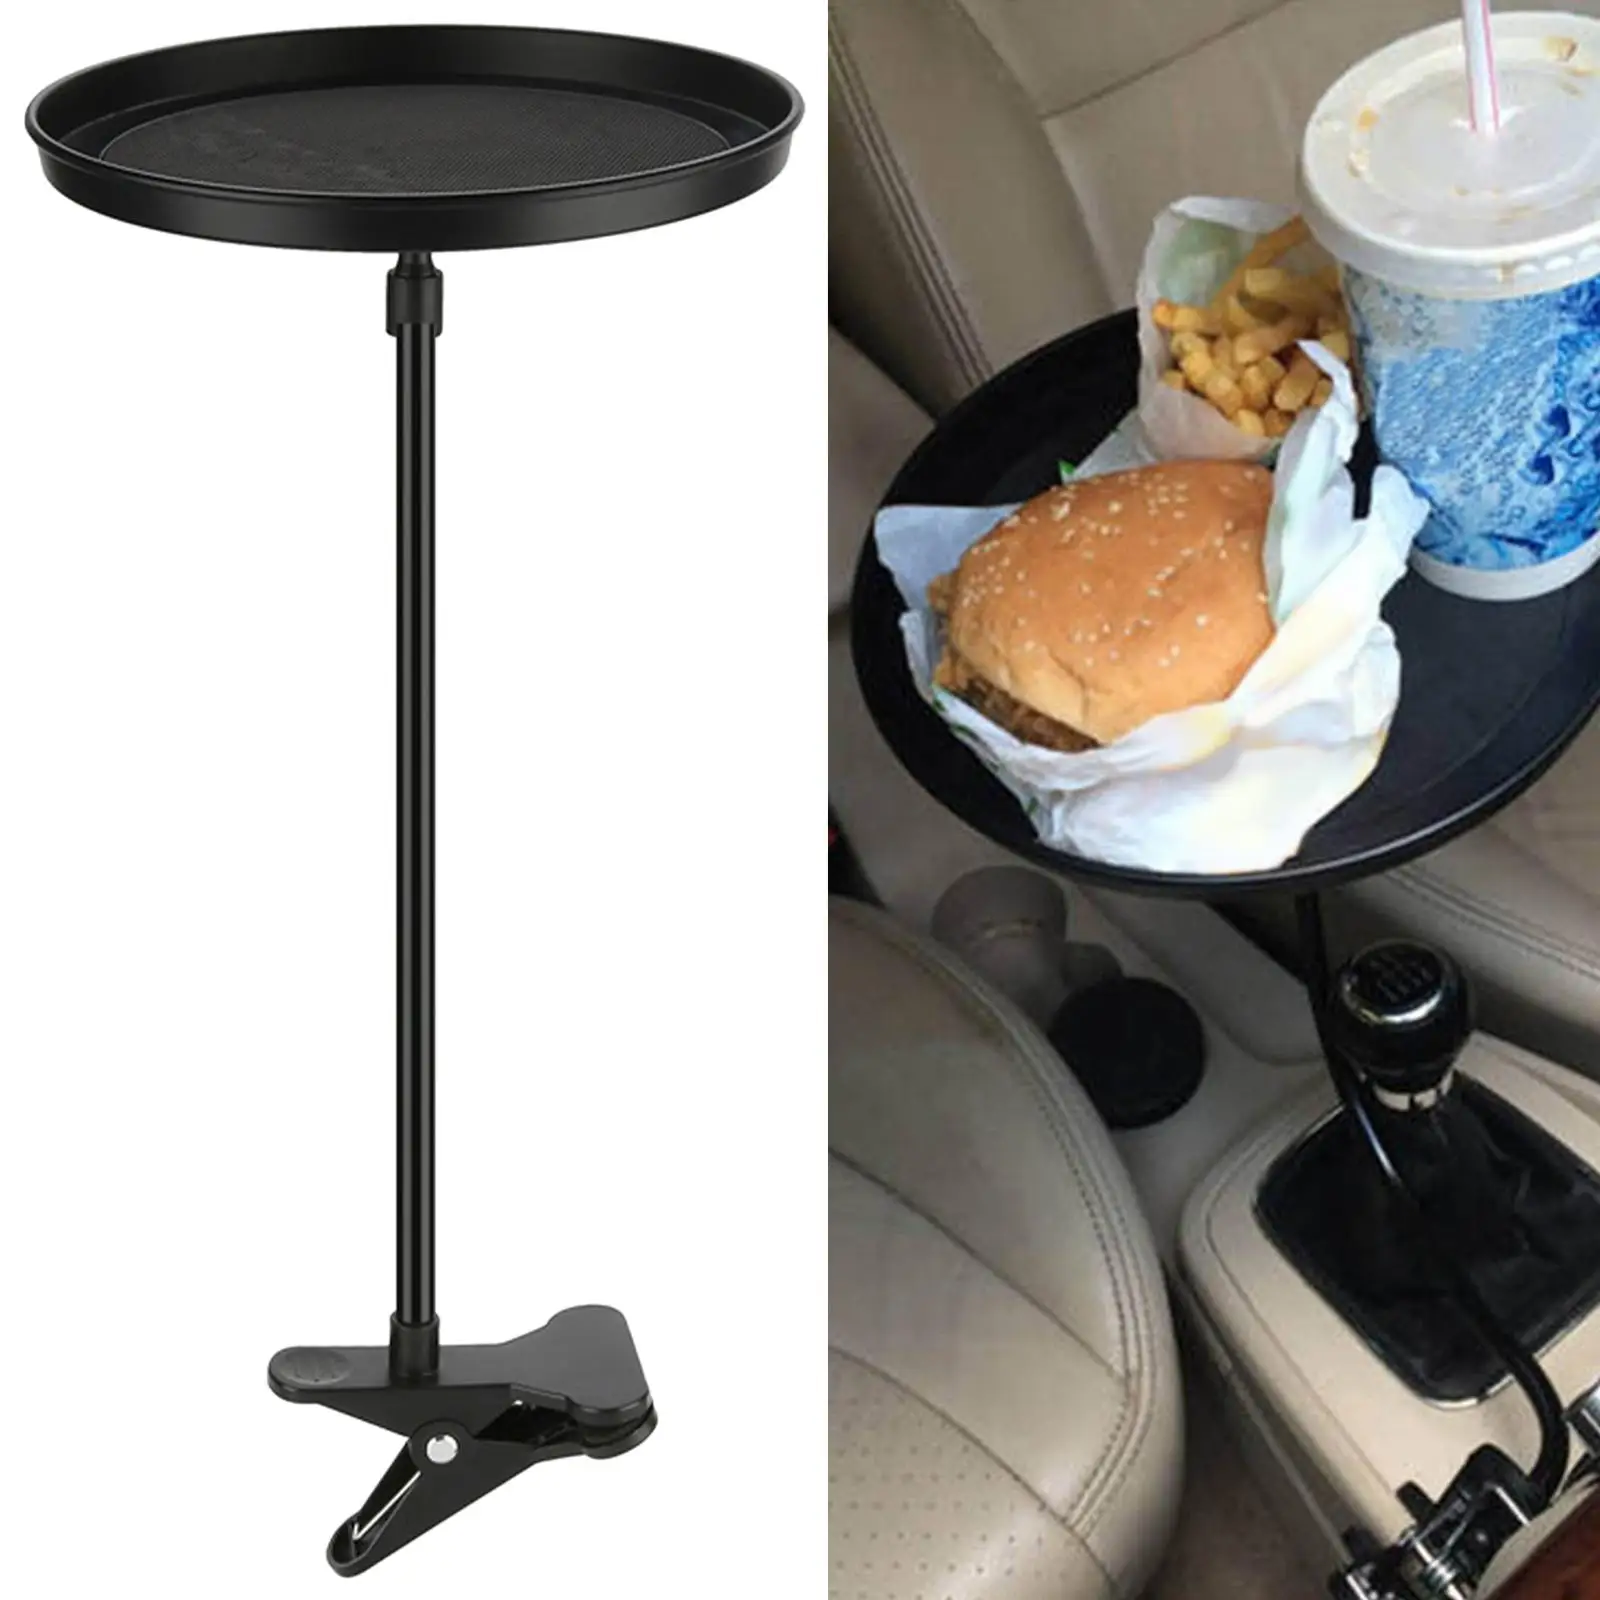 1x Car Food Tray Anti-Slip Stand with Clamp for Passenger Seat